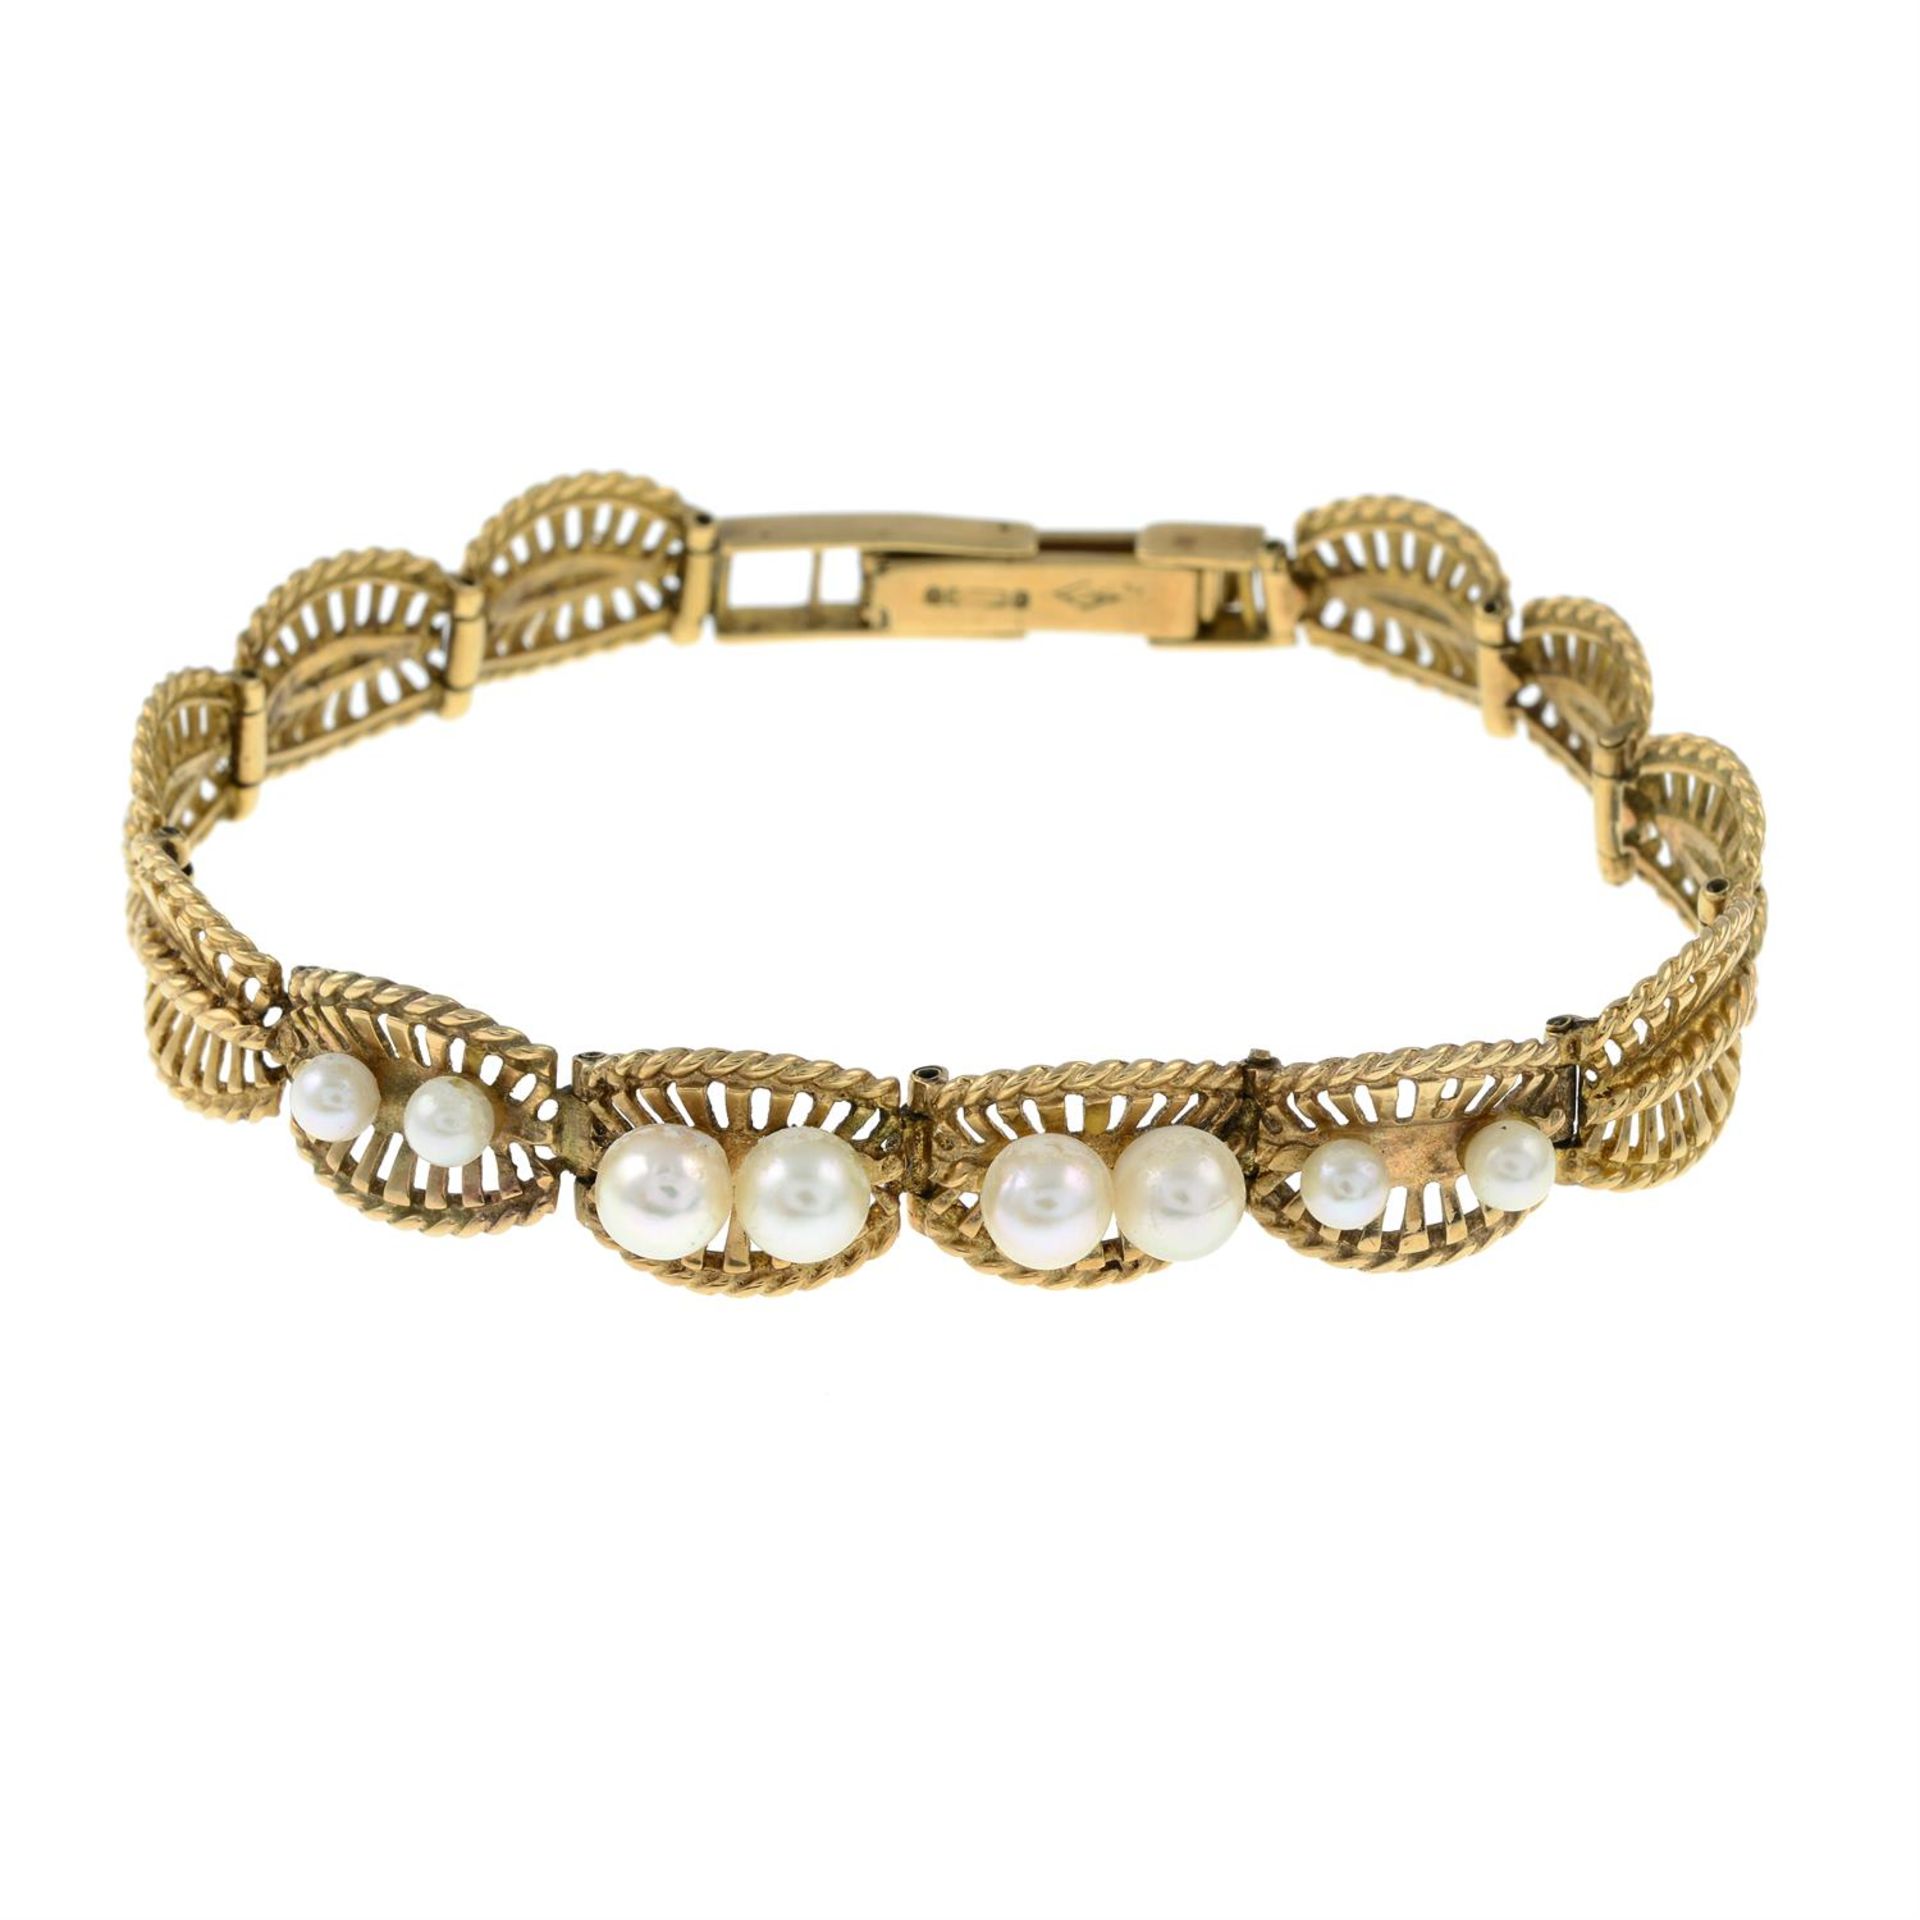 A 9ct gold openwork bracelet, with cultured pearl highlights.